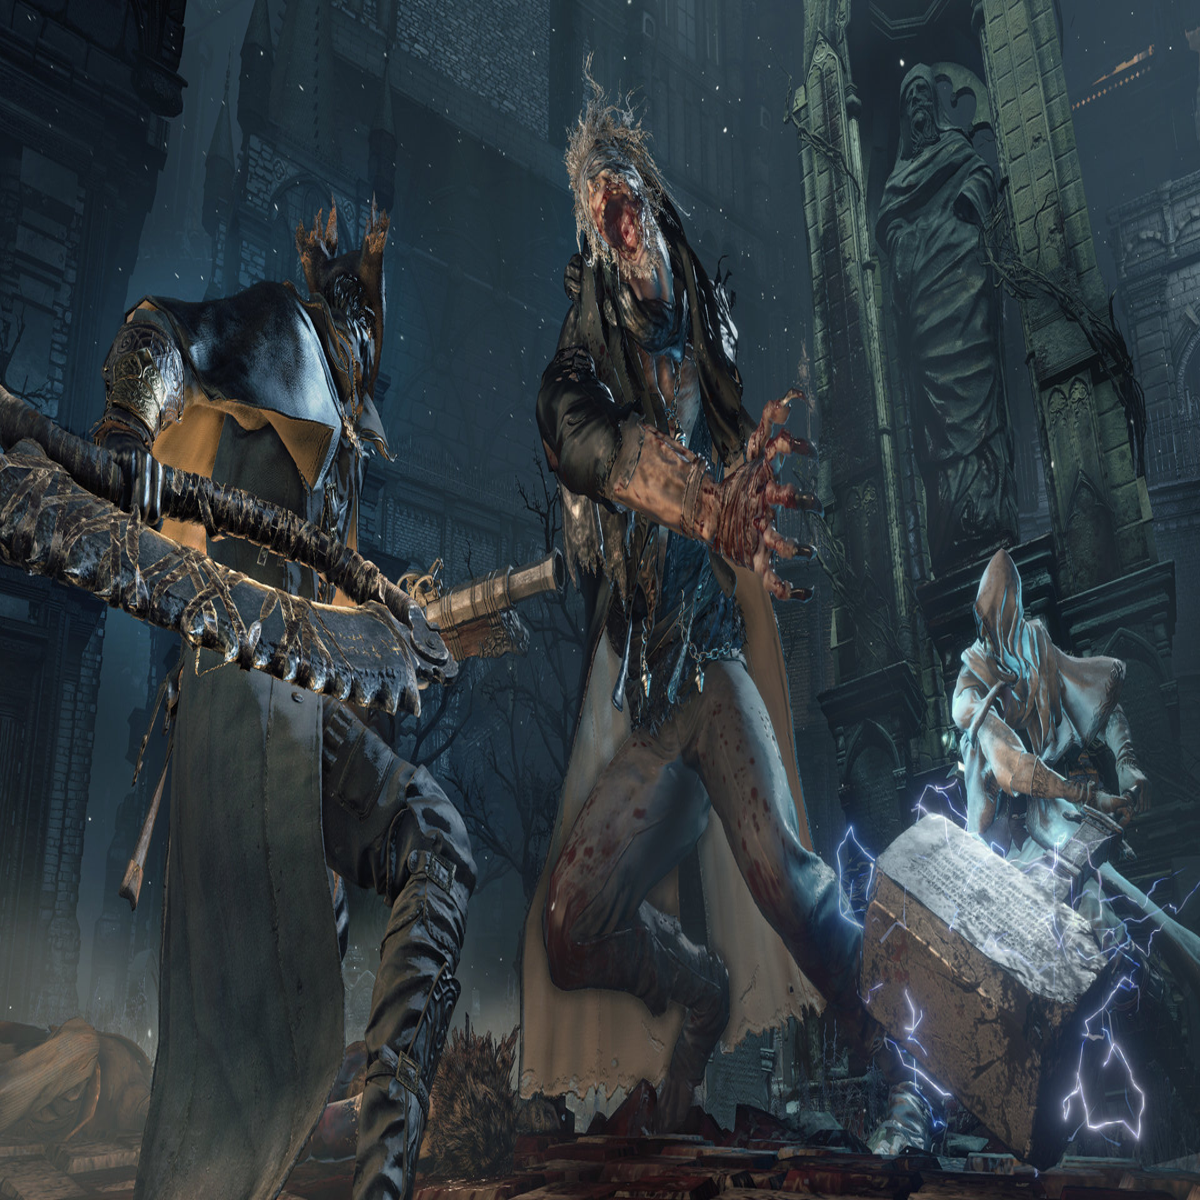 Rumour has it that Bloodborne is heading to PC - OC3D